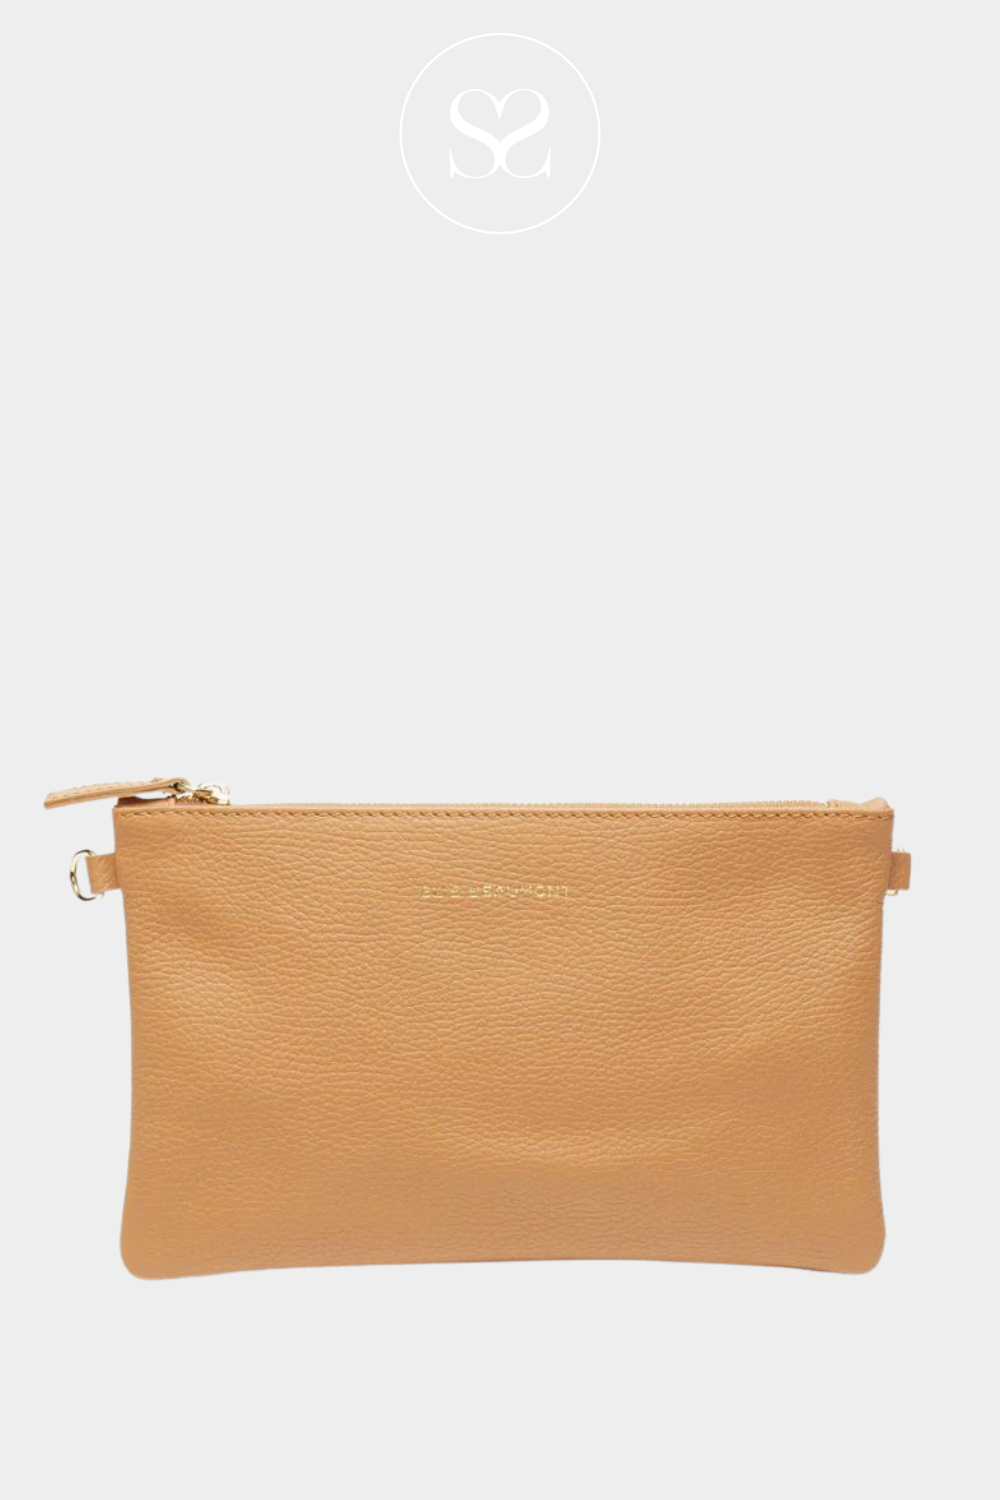 elie beaumont pouch bag in camel leather